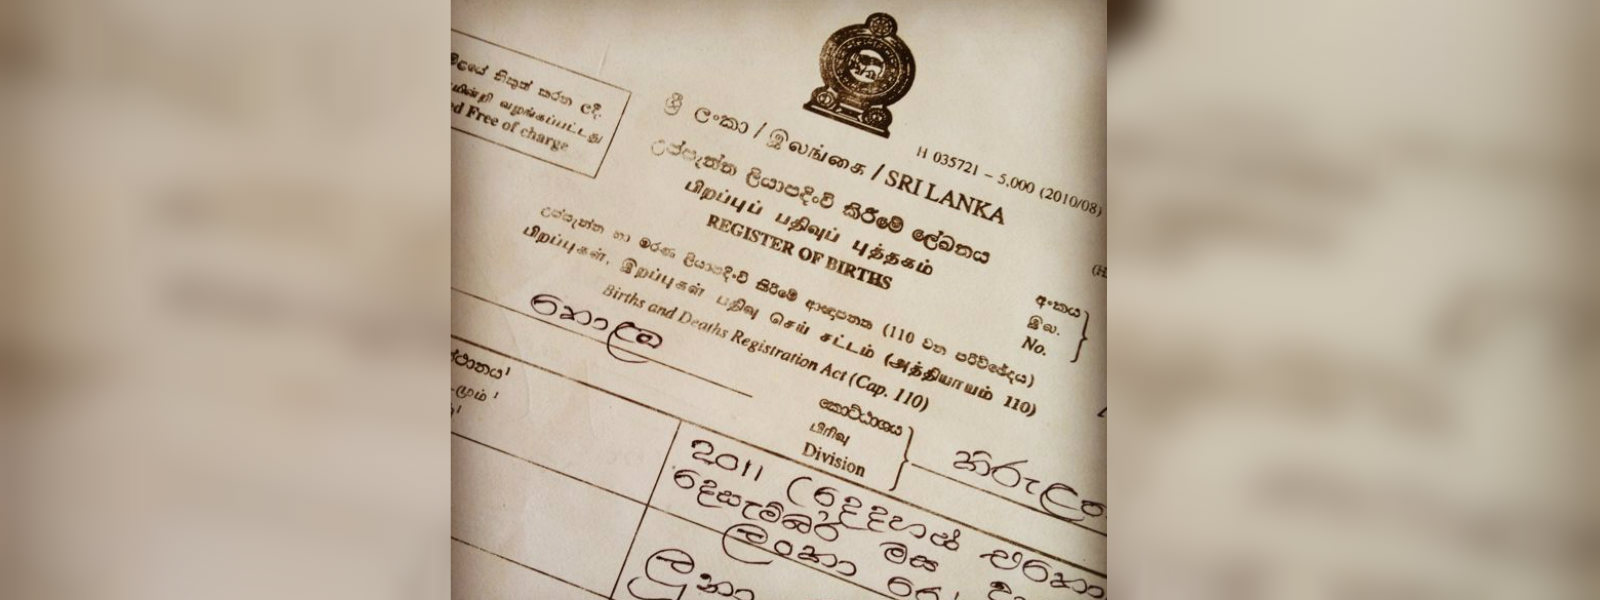 Birth,death & marriage certificates to be numbered